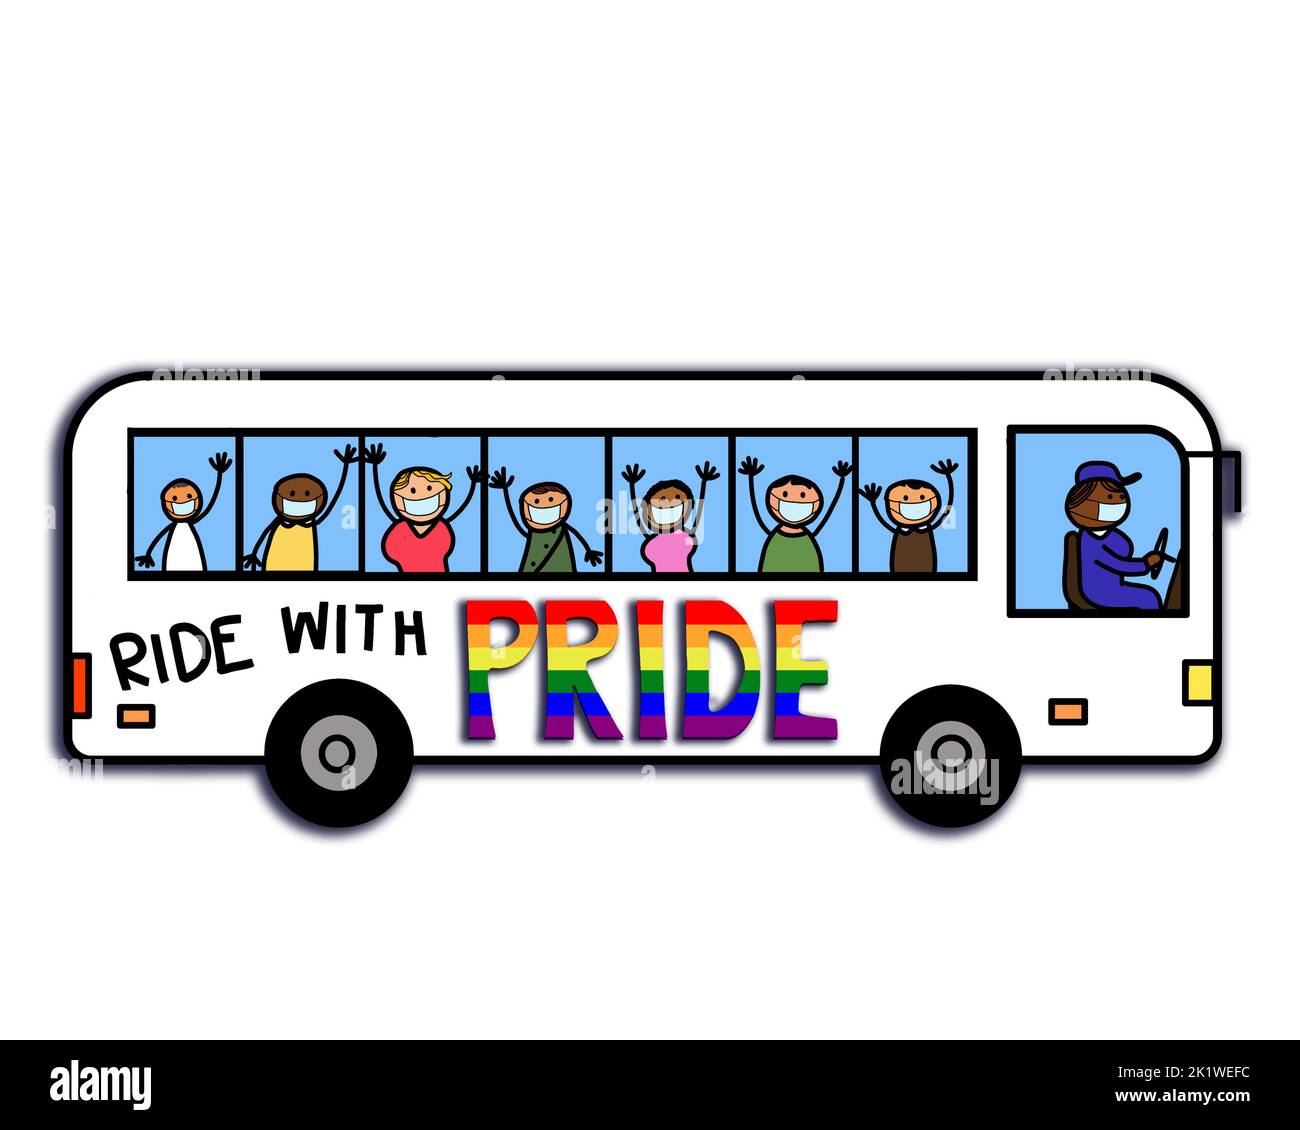 A public bus with gay pride rainbow LGBTQ symbol and a group of multi-ethnics passengers people wearing face mask raising arms. Stock Photo